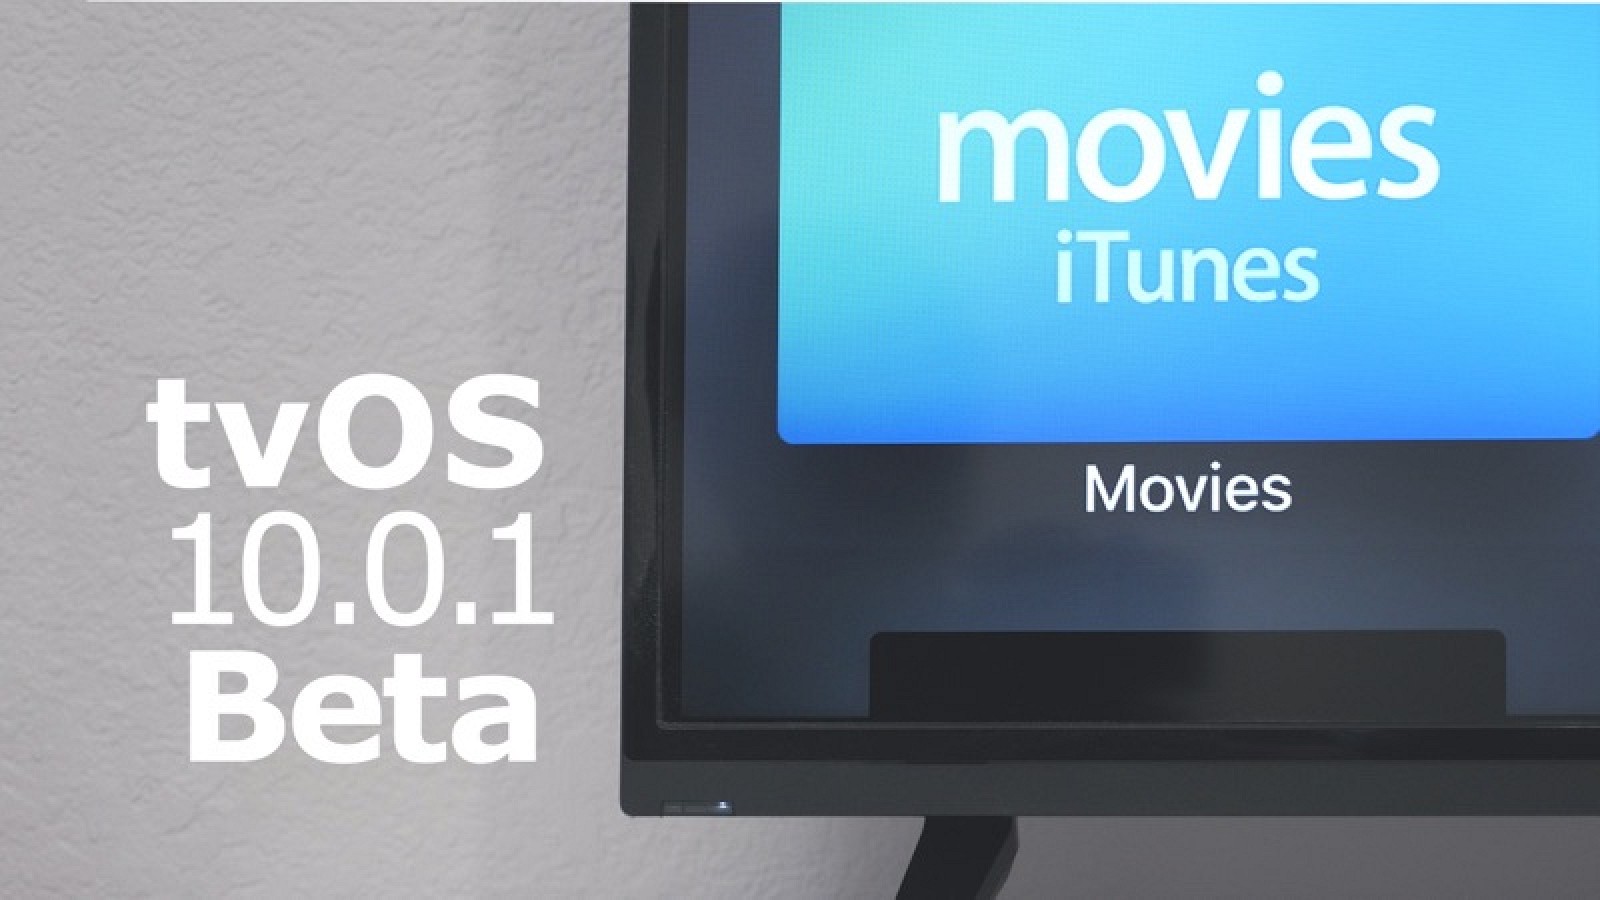 Apple Seeds Fourth Beta of tvOS 10.0.1 to Developers